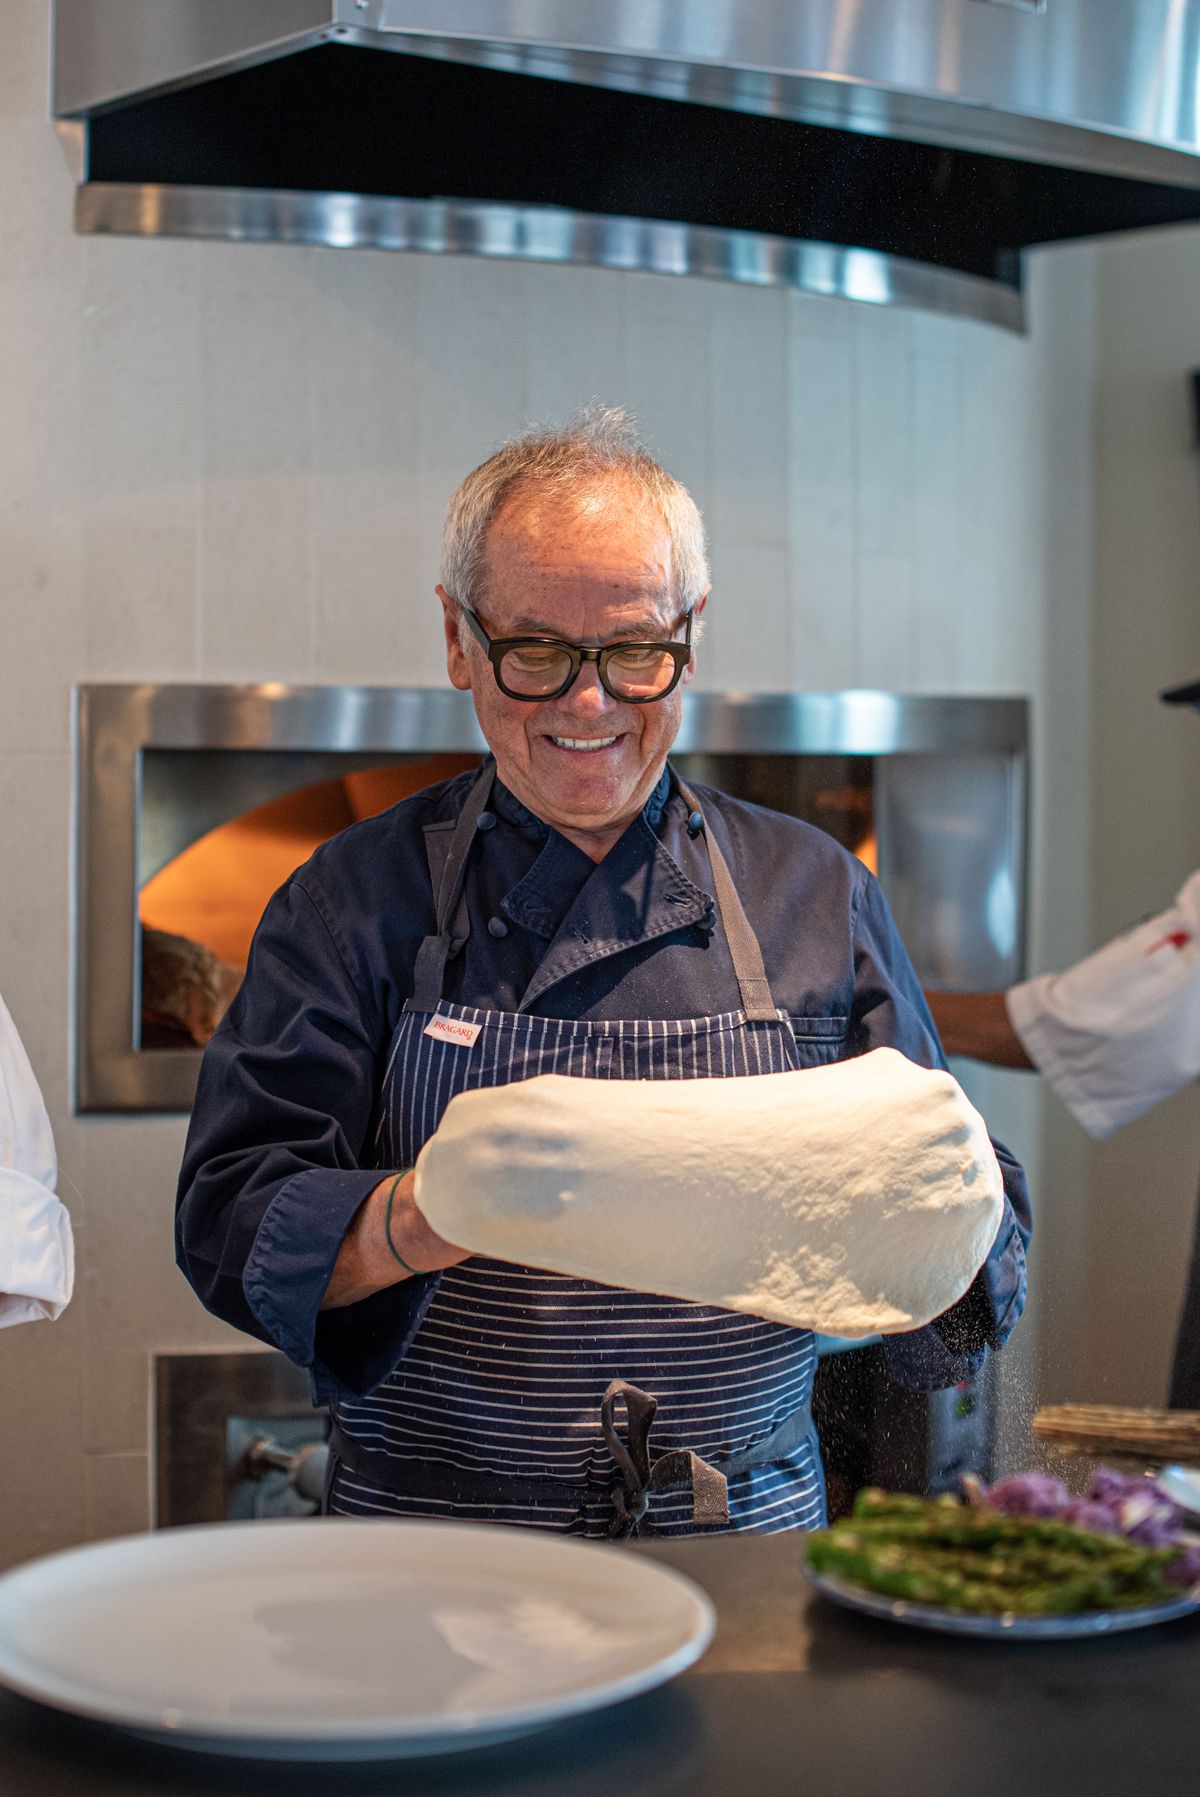 Wolfgang Puck stretches pizza dough.